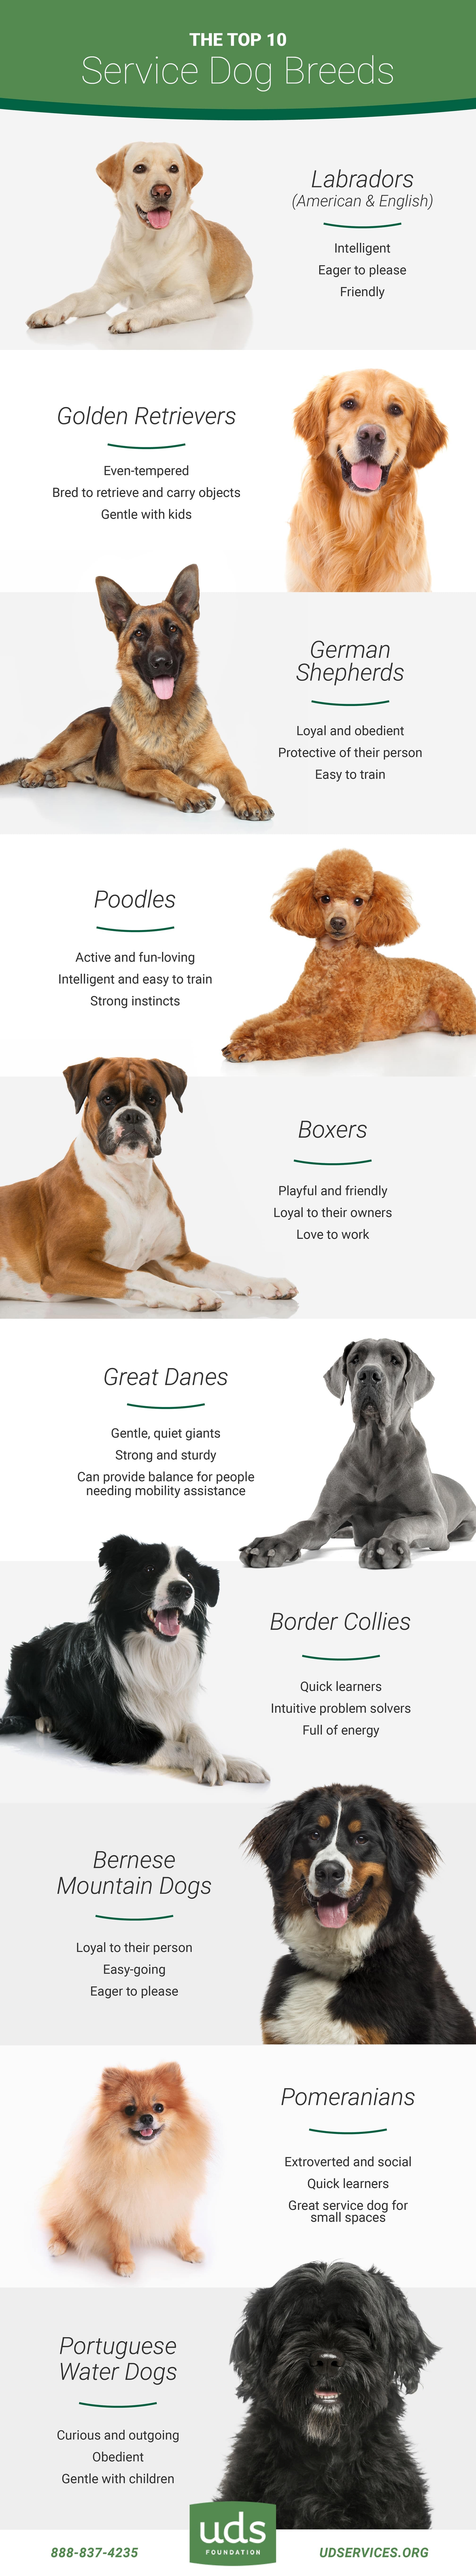 Types of service dogs showing the best breeds for service dogs 